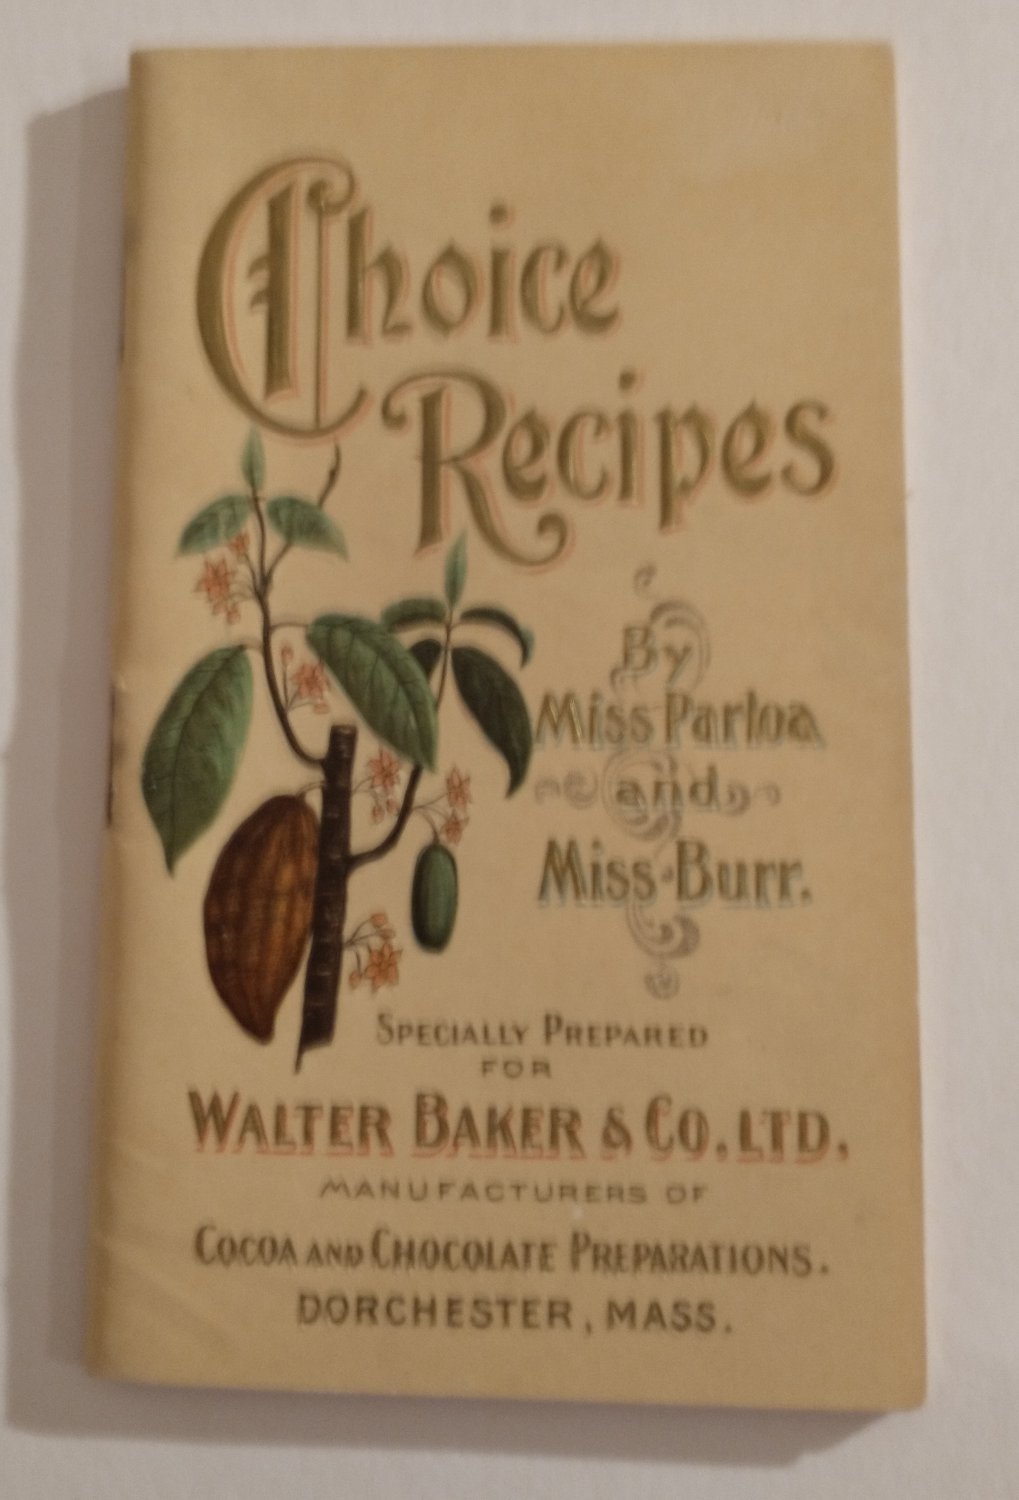 Walter Baker & Co. "Choice (chocolate) Recipes" - REDUCED